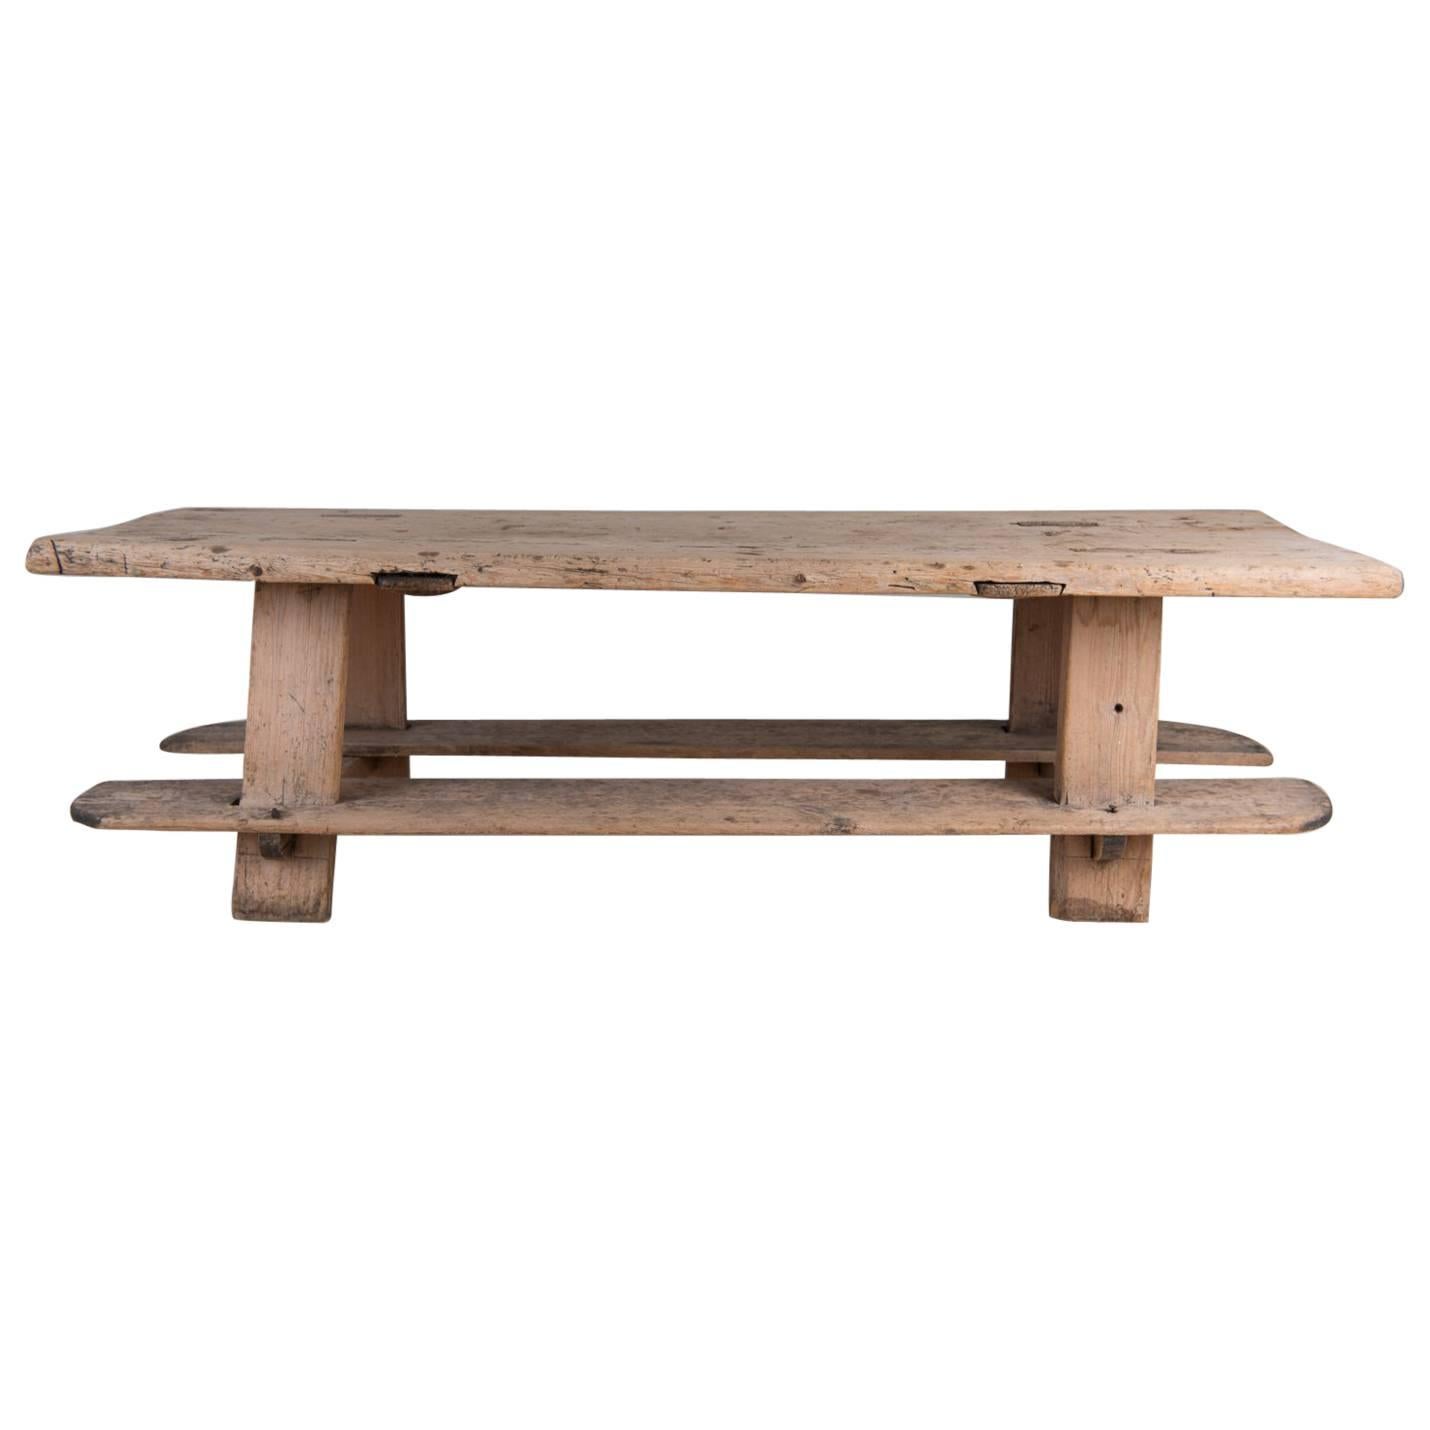 Early 18th Century Rustic Farmhouse Table For Sale